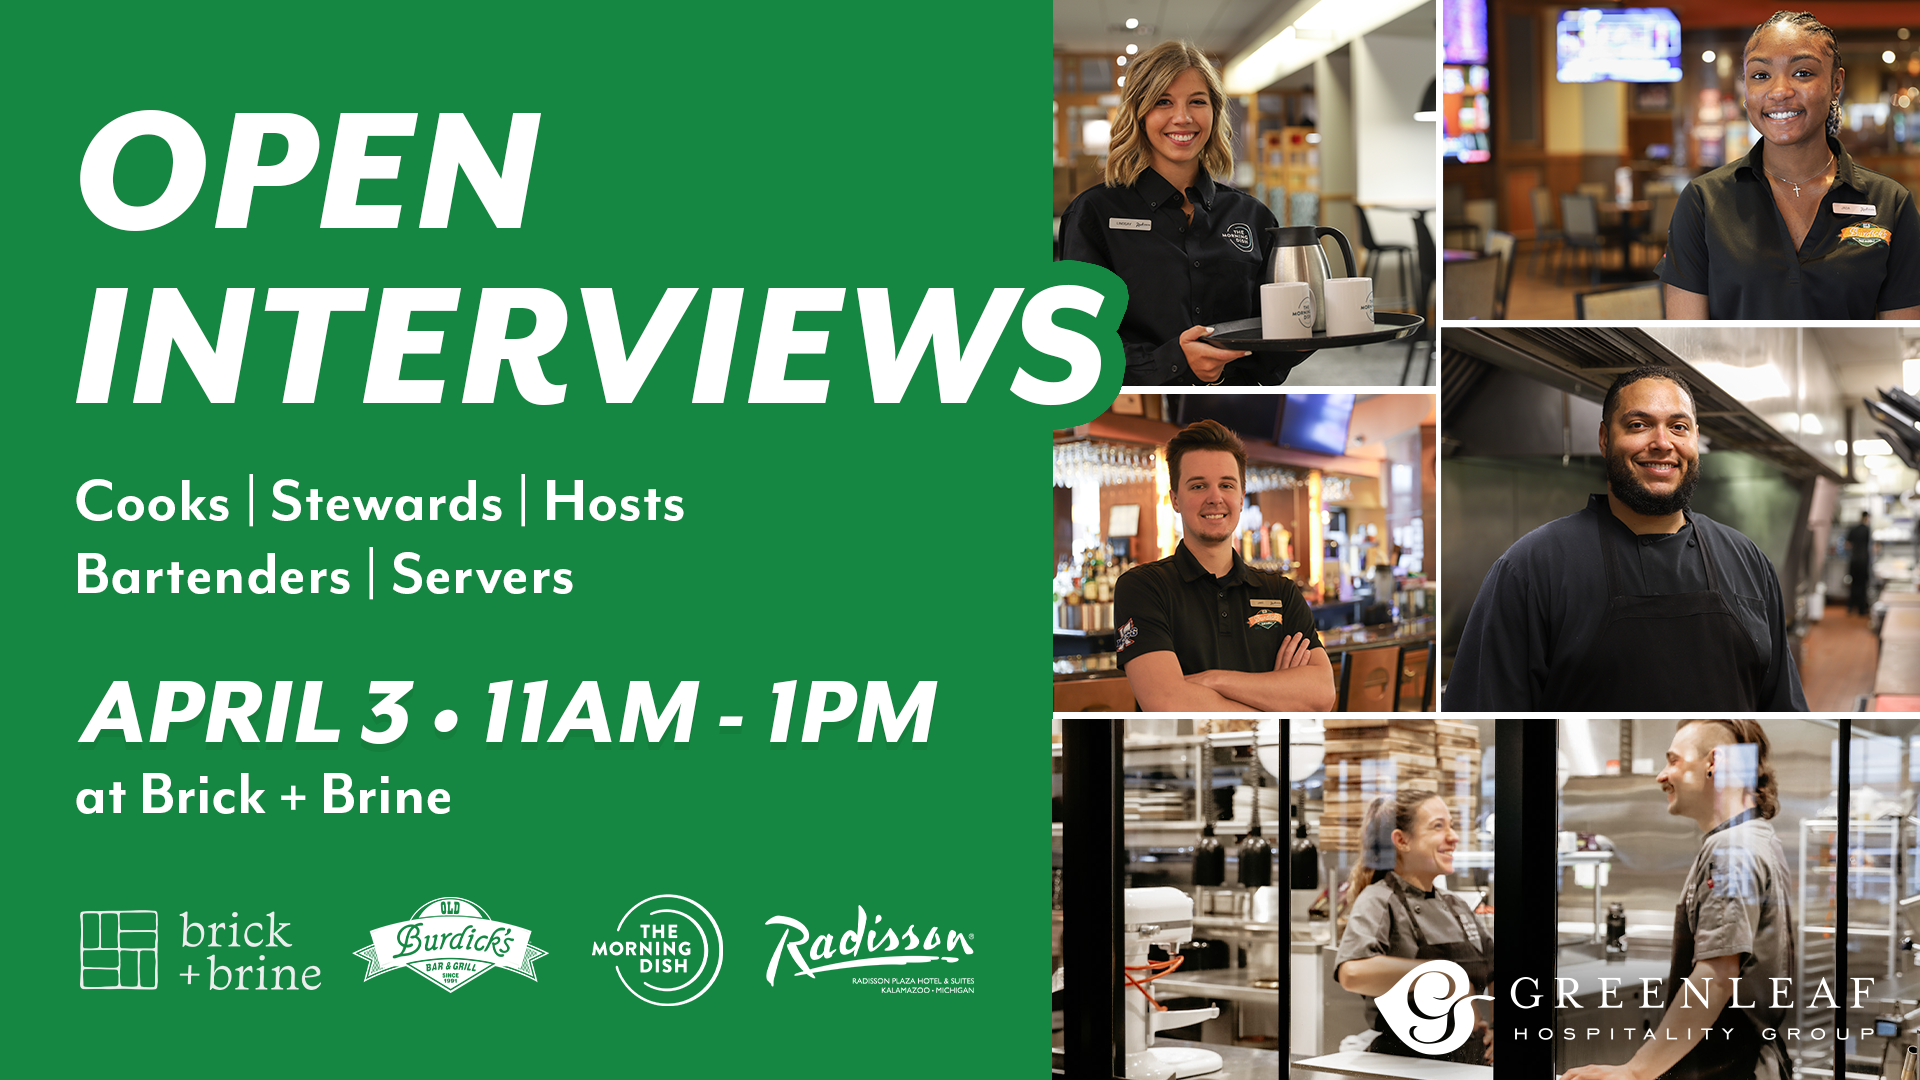 graphic with open interviews for food and beverage roles. images for a server holding a tray, servers smiling at camera, cook smiling at camera, and cooks laughing in the kitchen